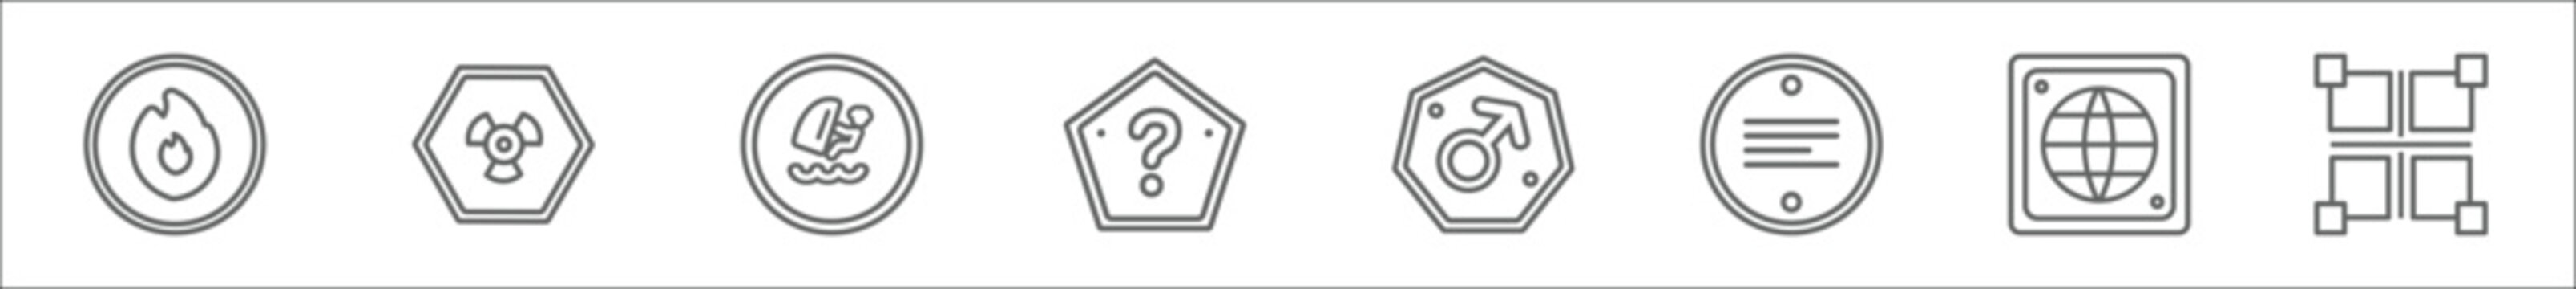 outline set of signs line icons. linear vector icons such as fire hazard, radioactive warning, kitesurf, question mark button, male, align left, world grid, borders